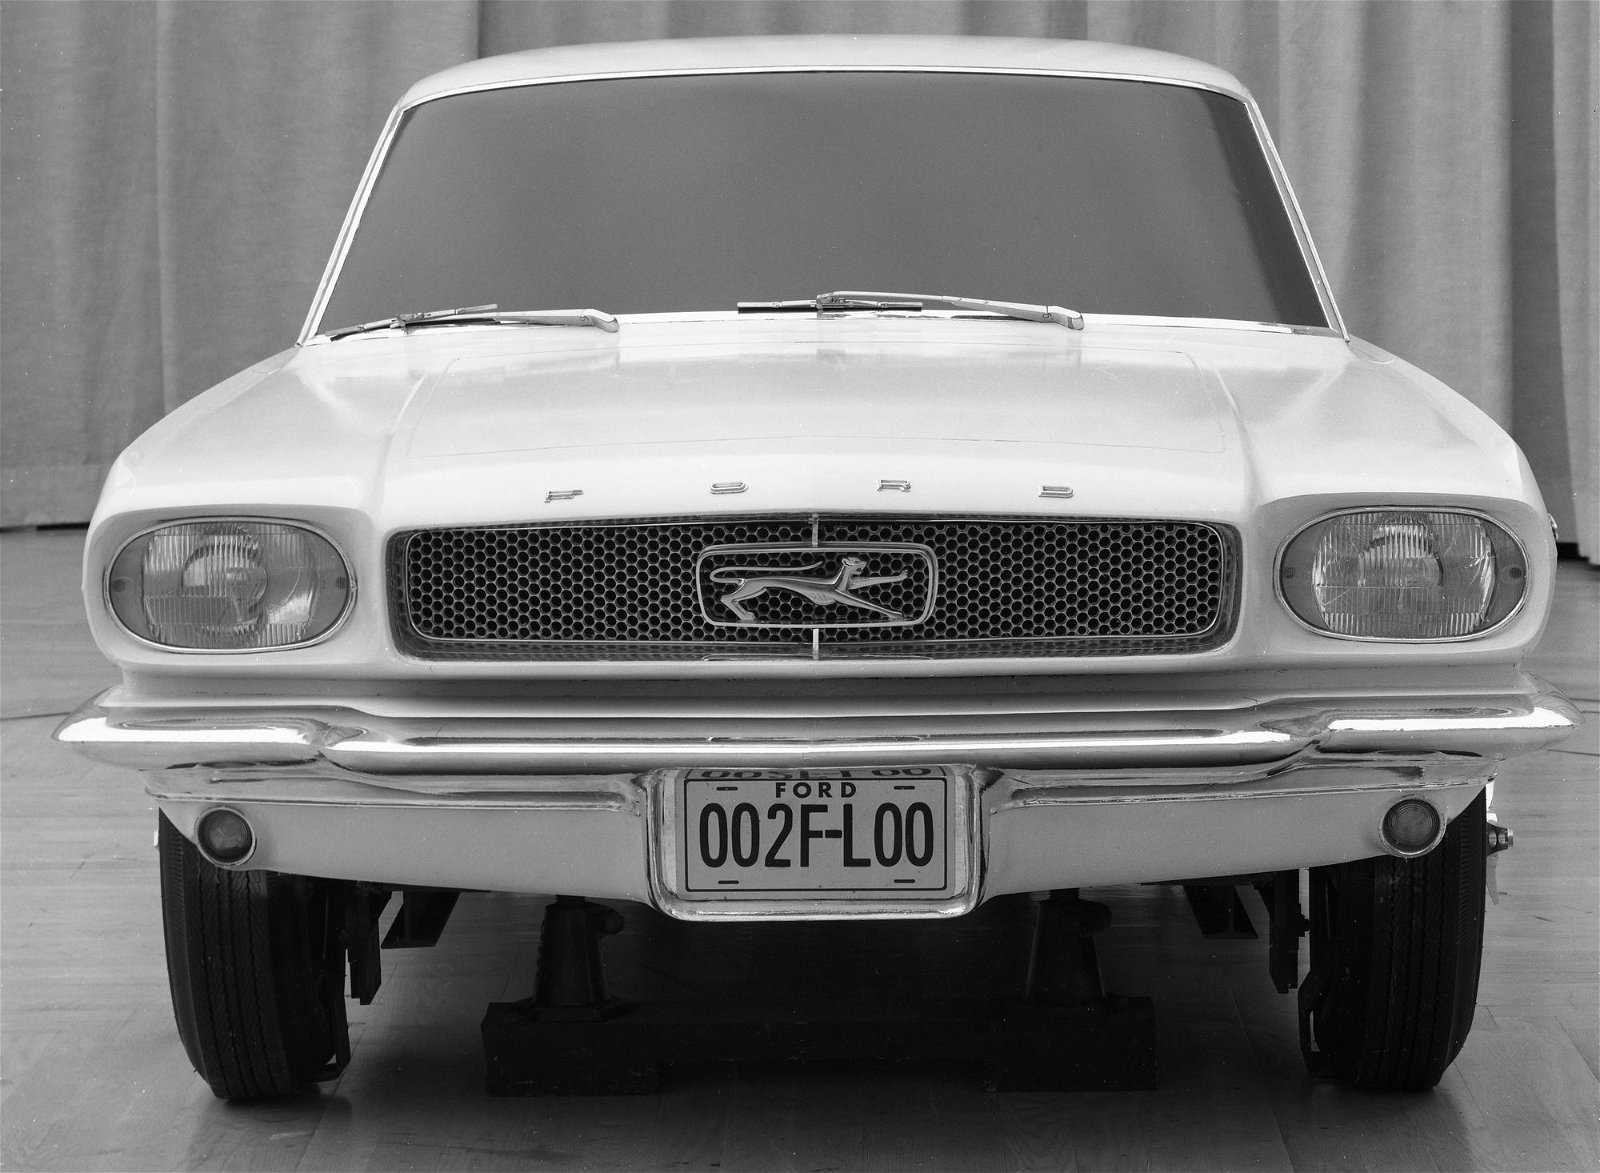 Q6-Cougar-Ford-Mustang